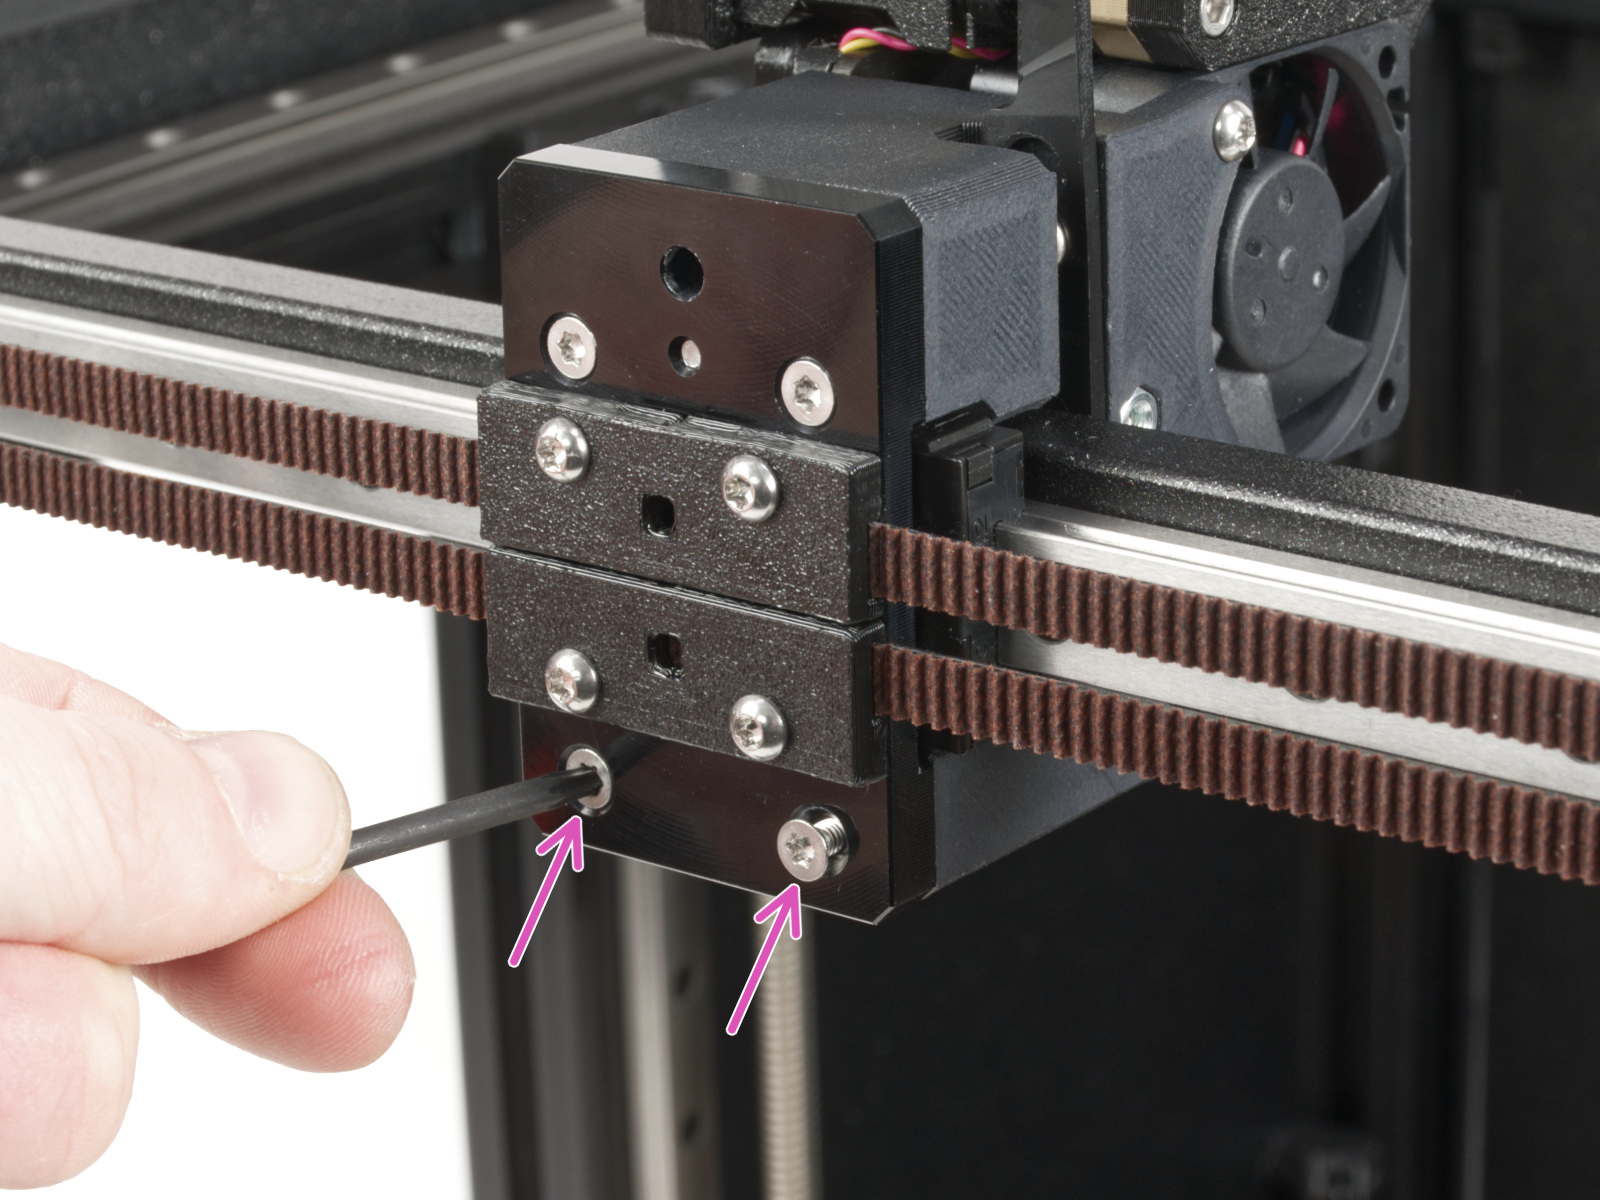 Securing the extruder